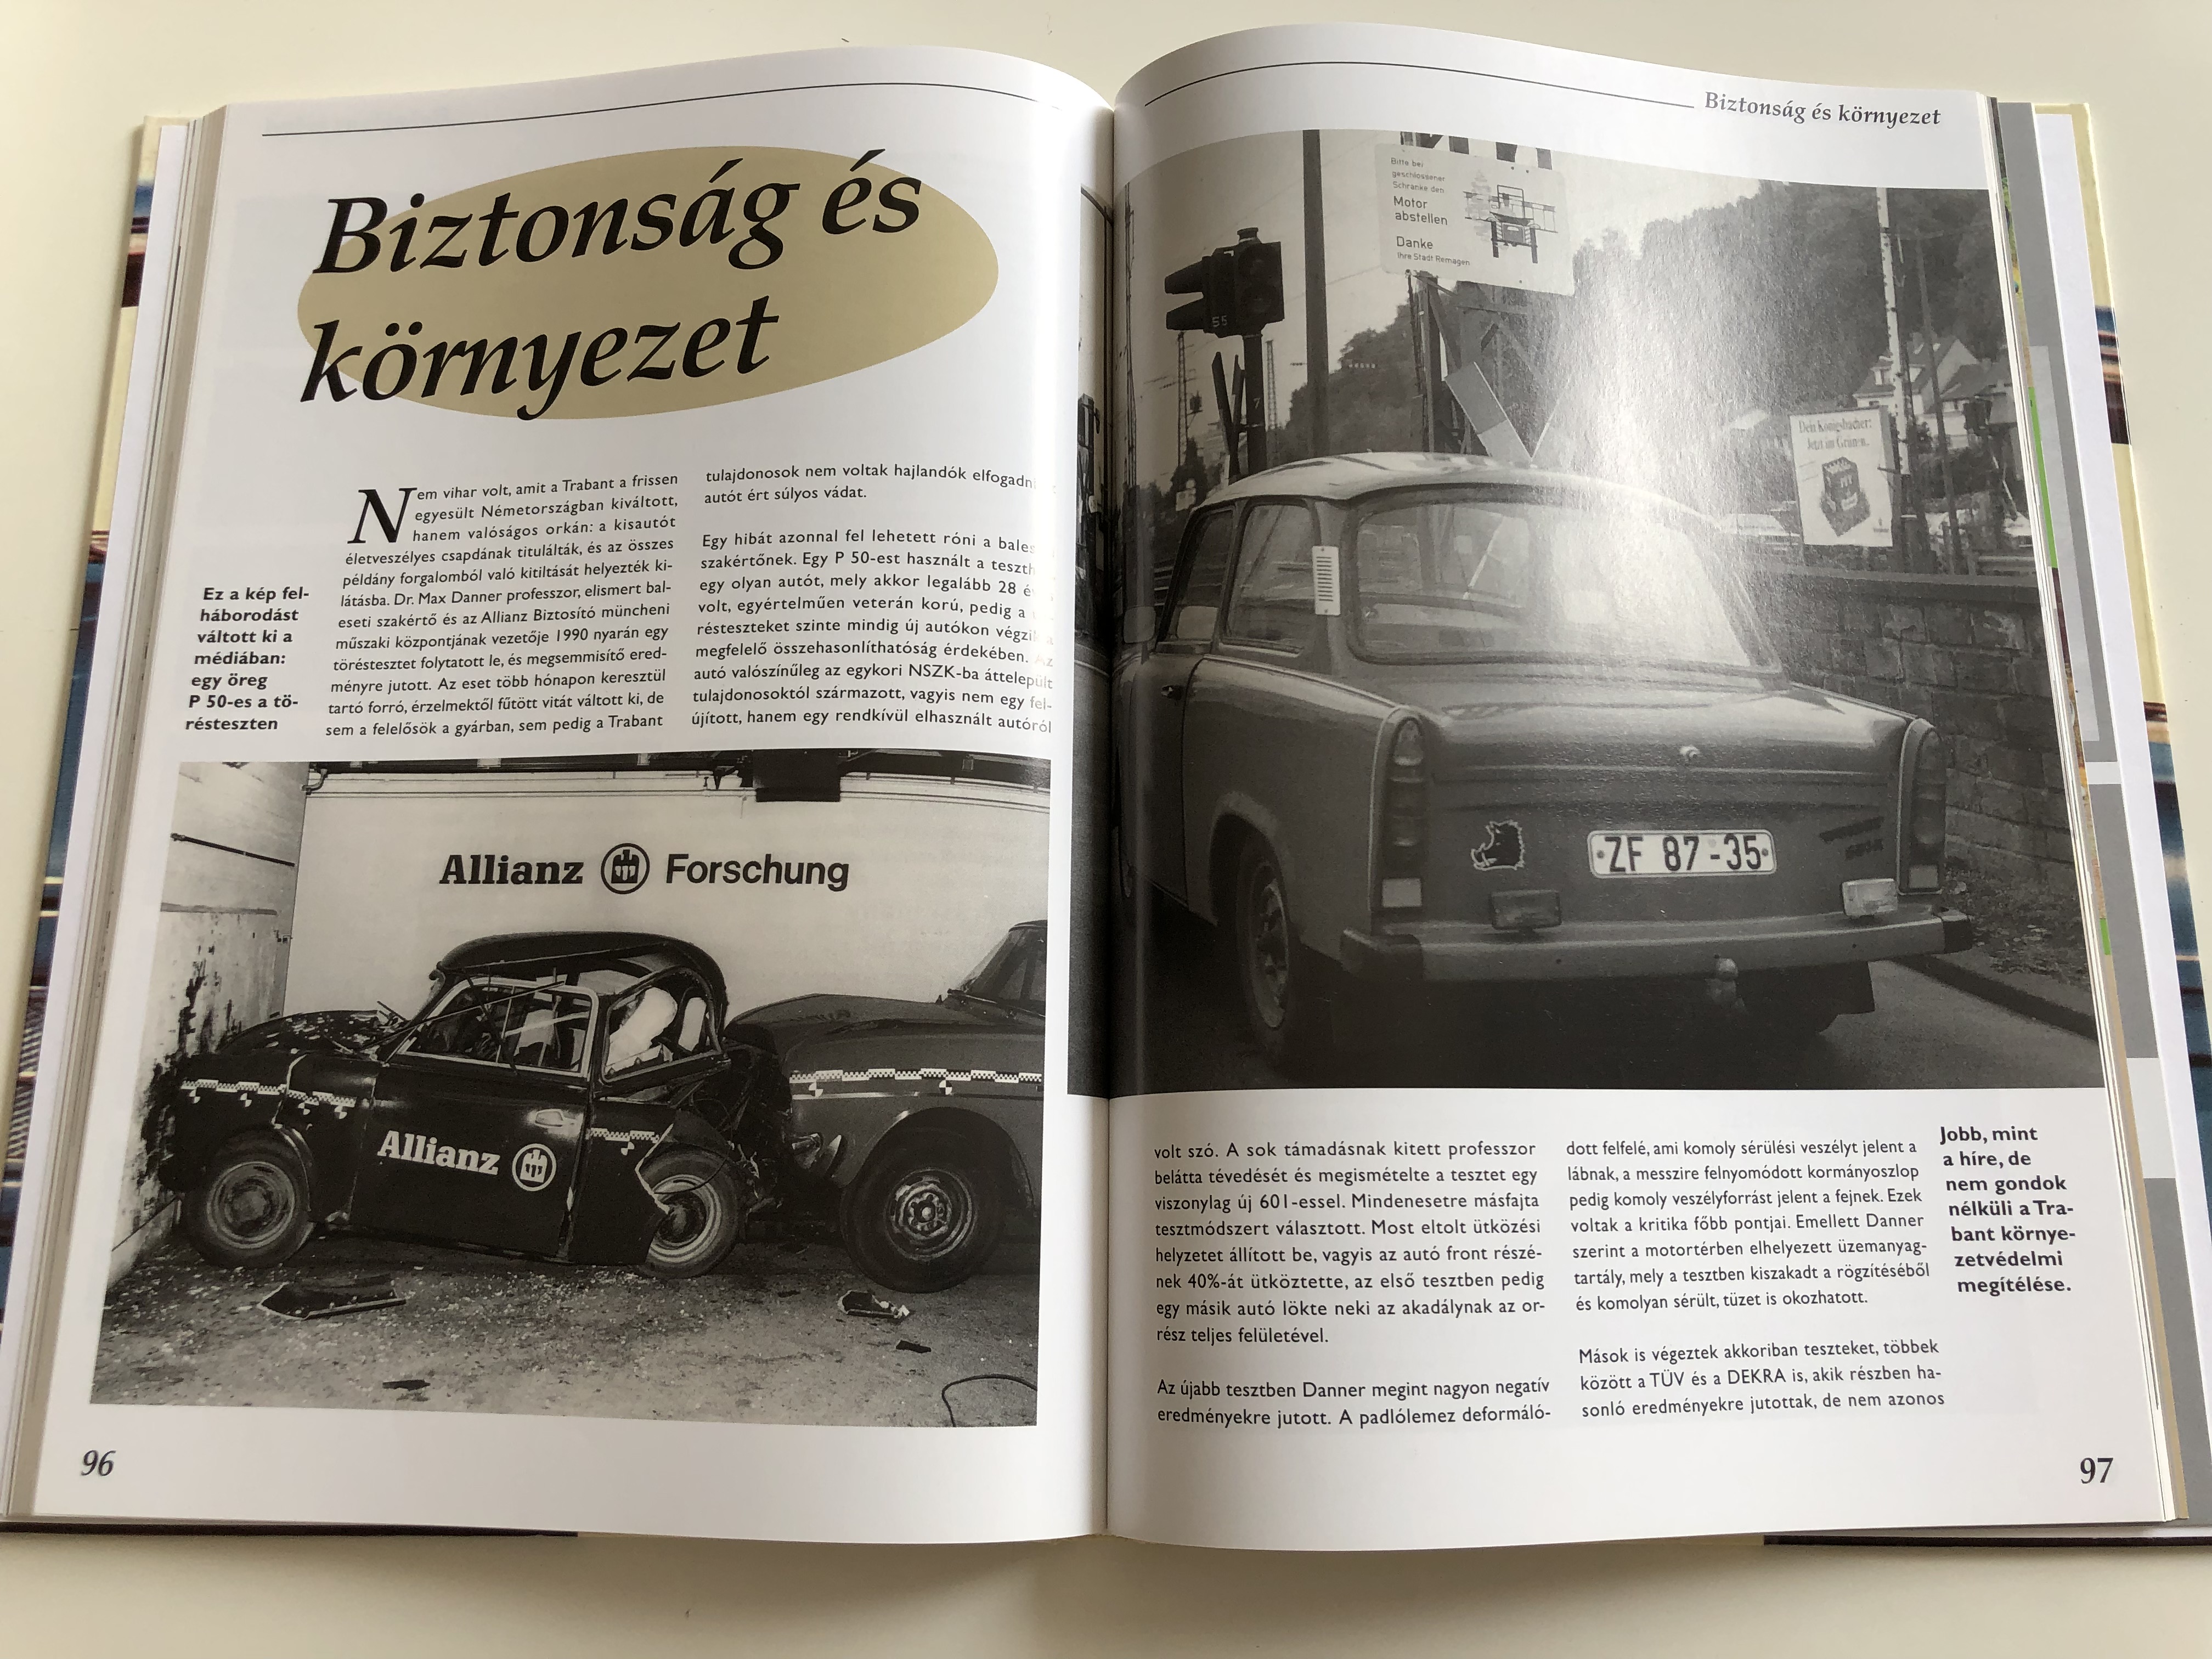 trabant-story-by-matthias-r-cke-hungarian-edition-of-die-trabi-story-trabant-the-popular-east-german-car-history-culture-technical-details-hardcover-2007-mar-ti-k-nyvkiad-12-.jpg